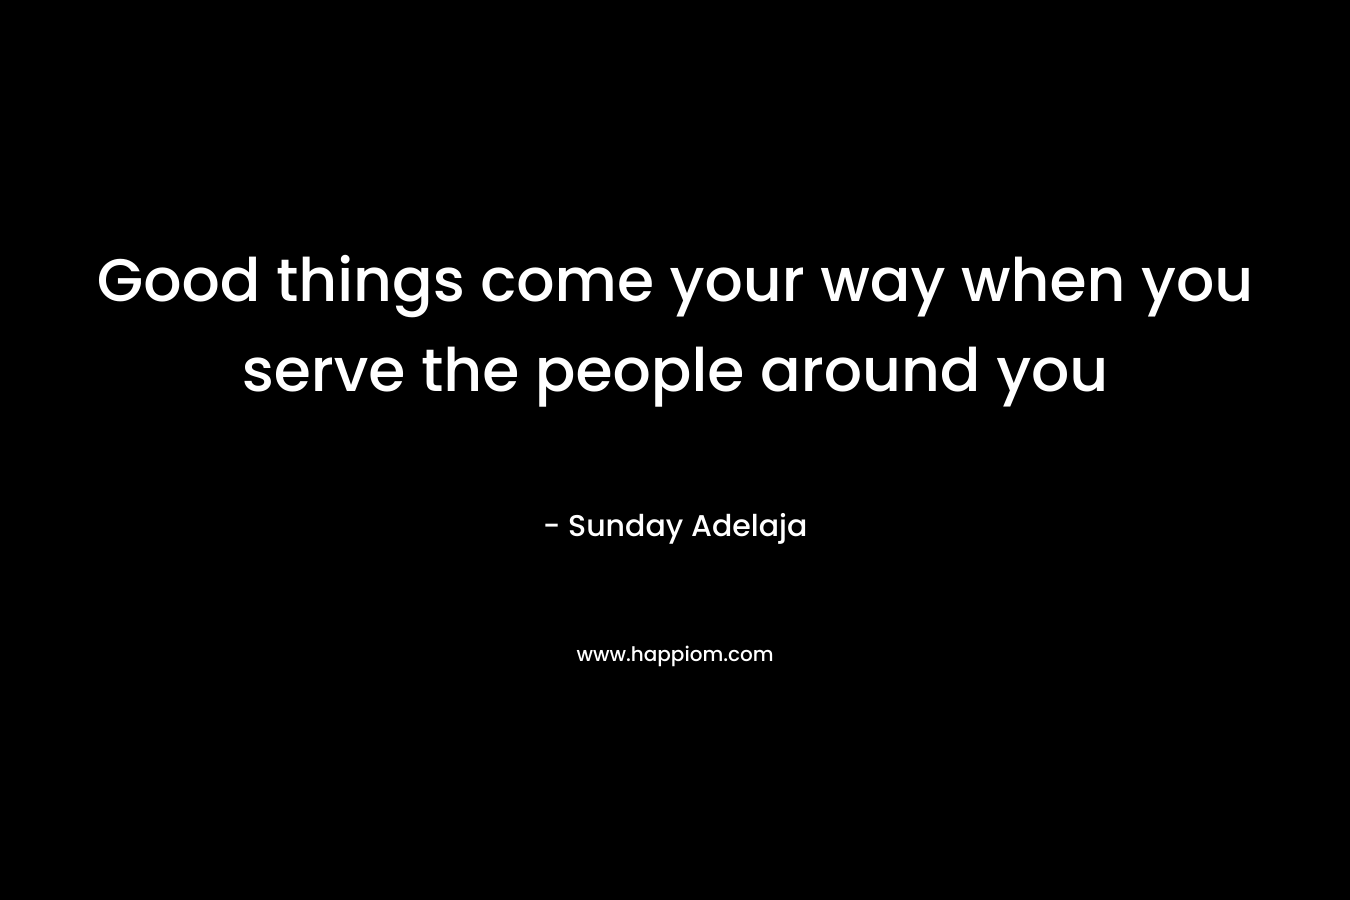 Good things come your way when you serve the people around you